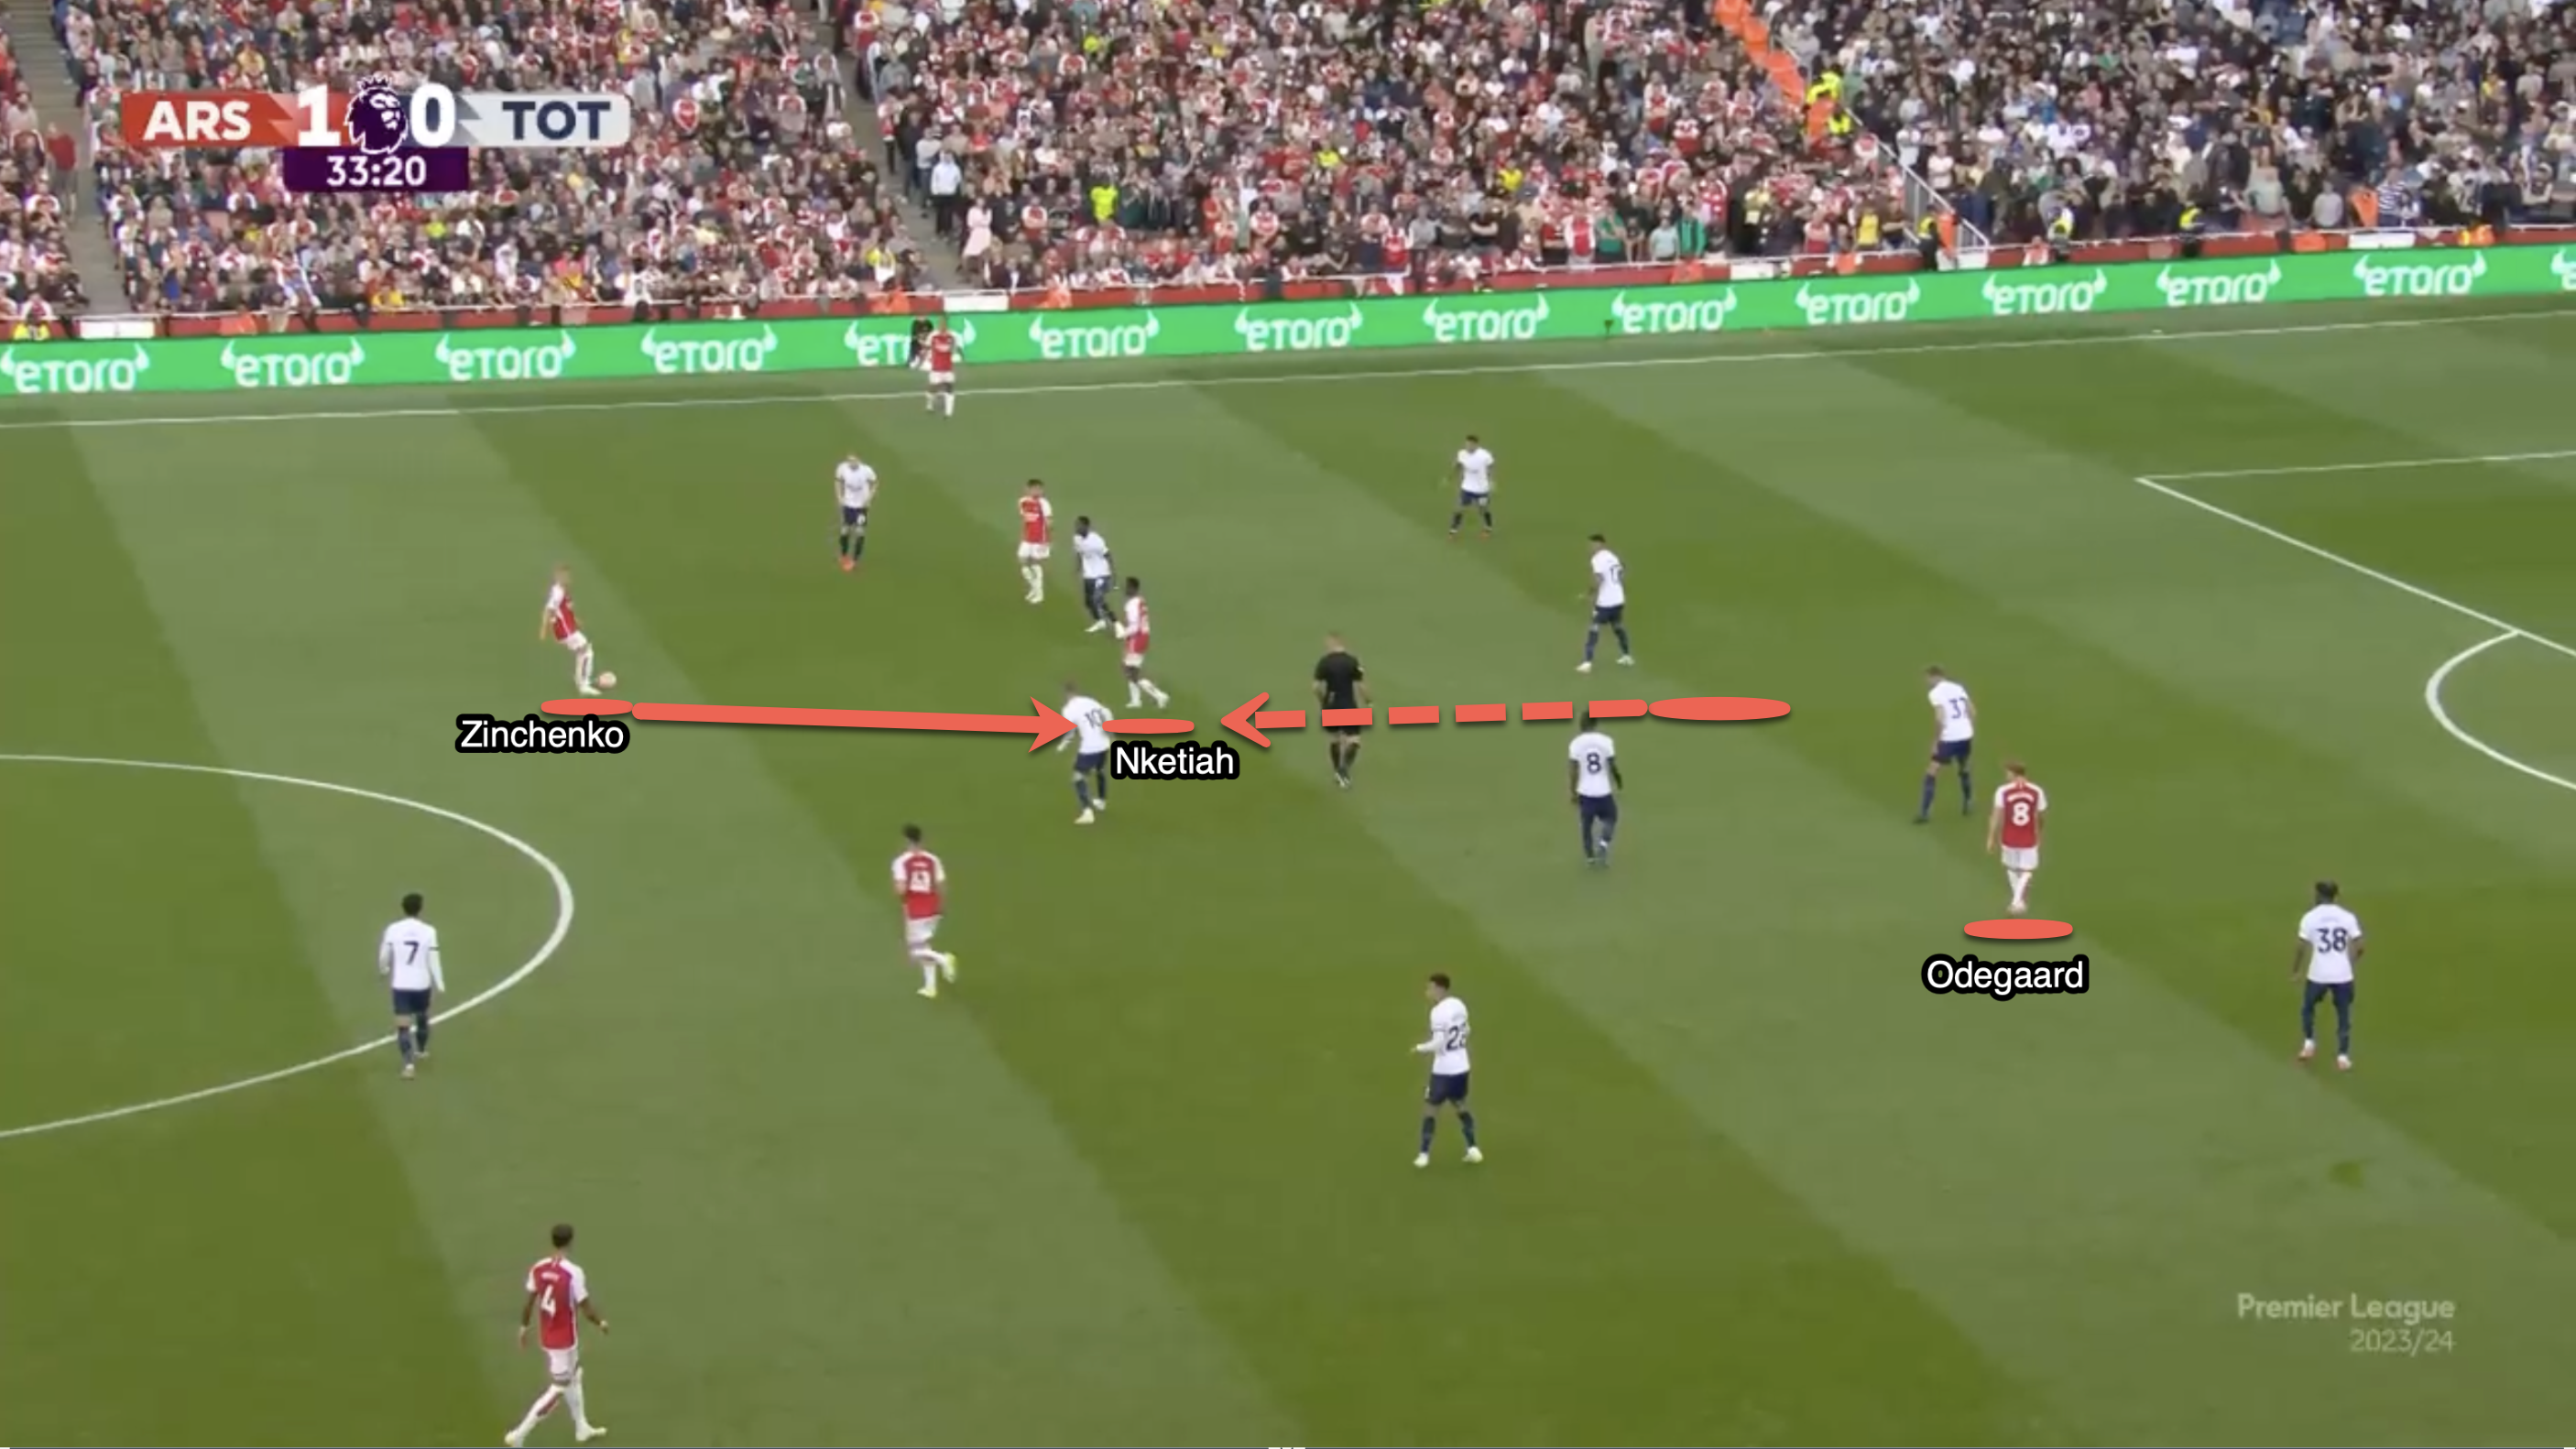 Here, we see Arsenal building the attack from a deeper position. Nketiah has dropped so deep that he effectively receives the ball short from the player in possession. A more advanced position, as marked here, would allow Arsenal to play through the lines.